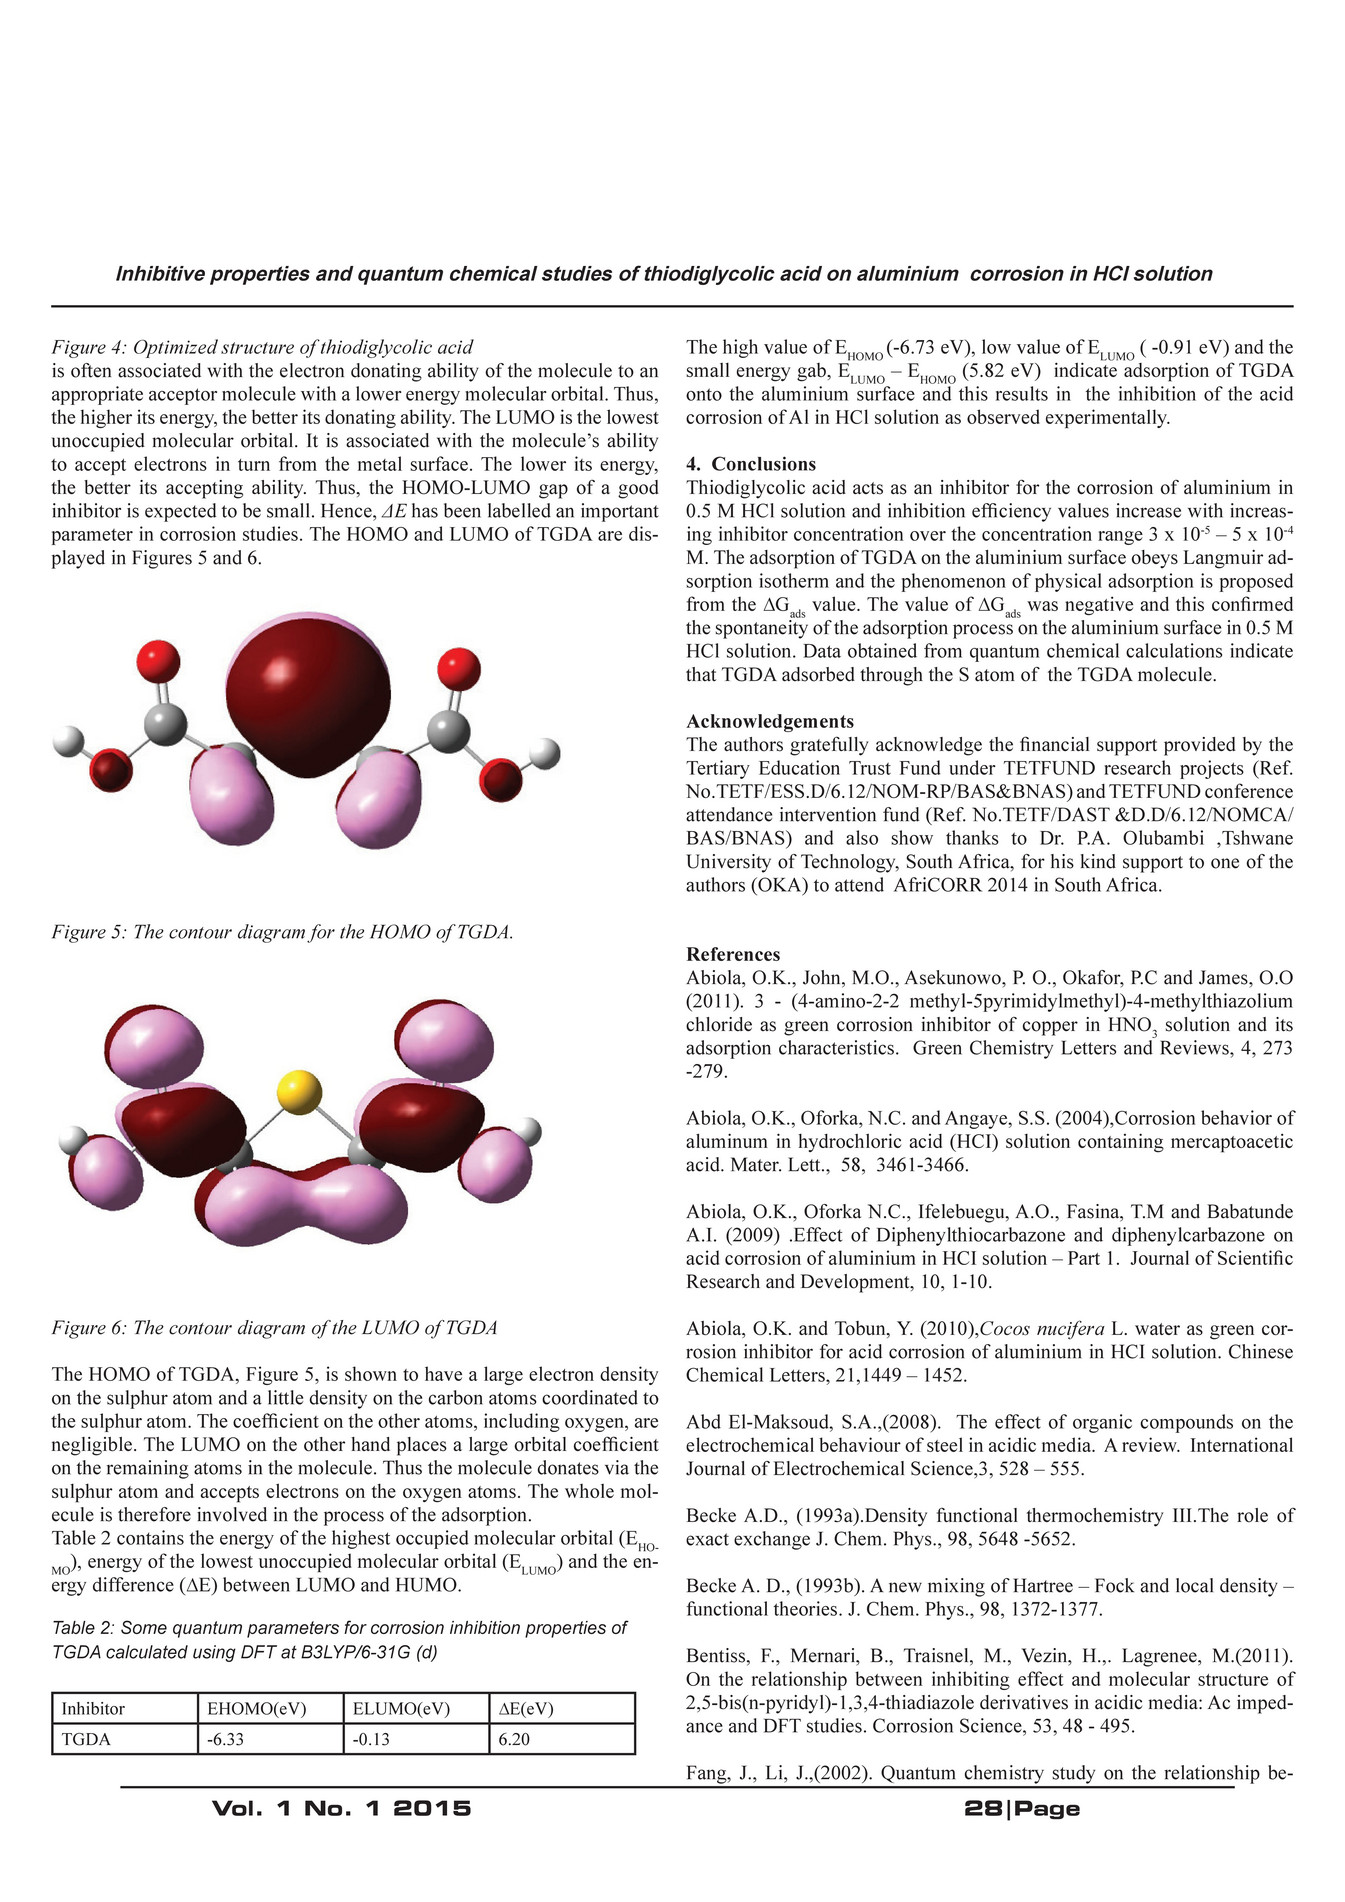 African Corrosion Journal Vol 1 Issue 1 Page 30 31 Created With Publitas Com